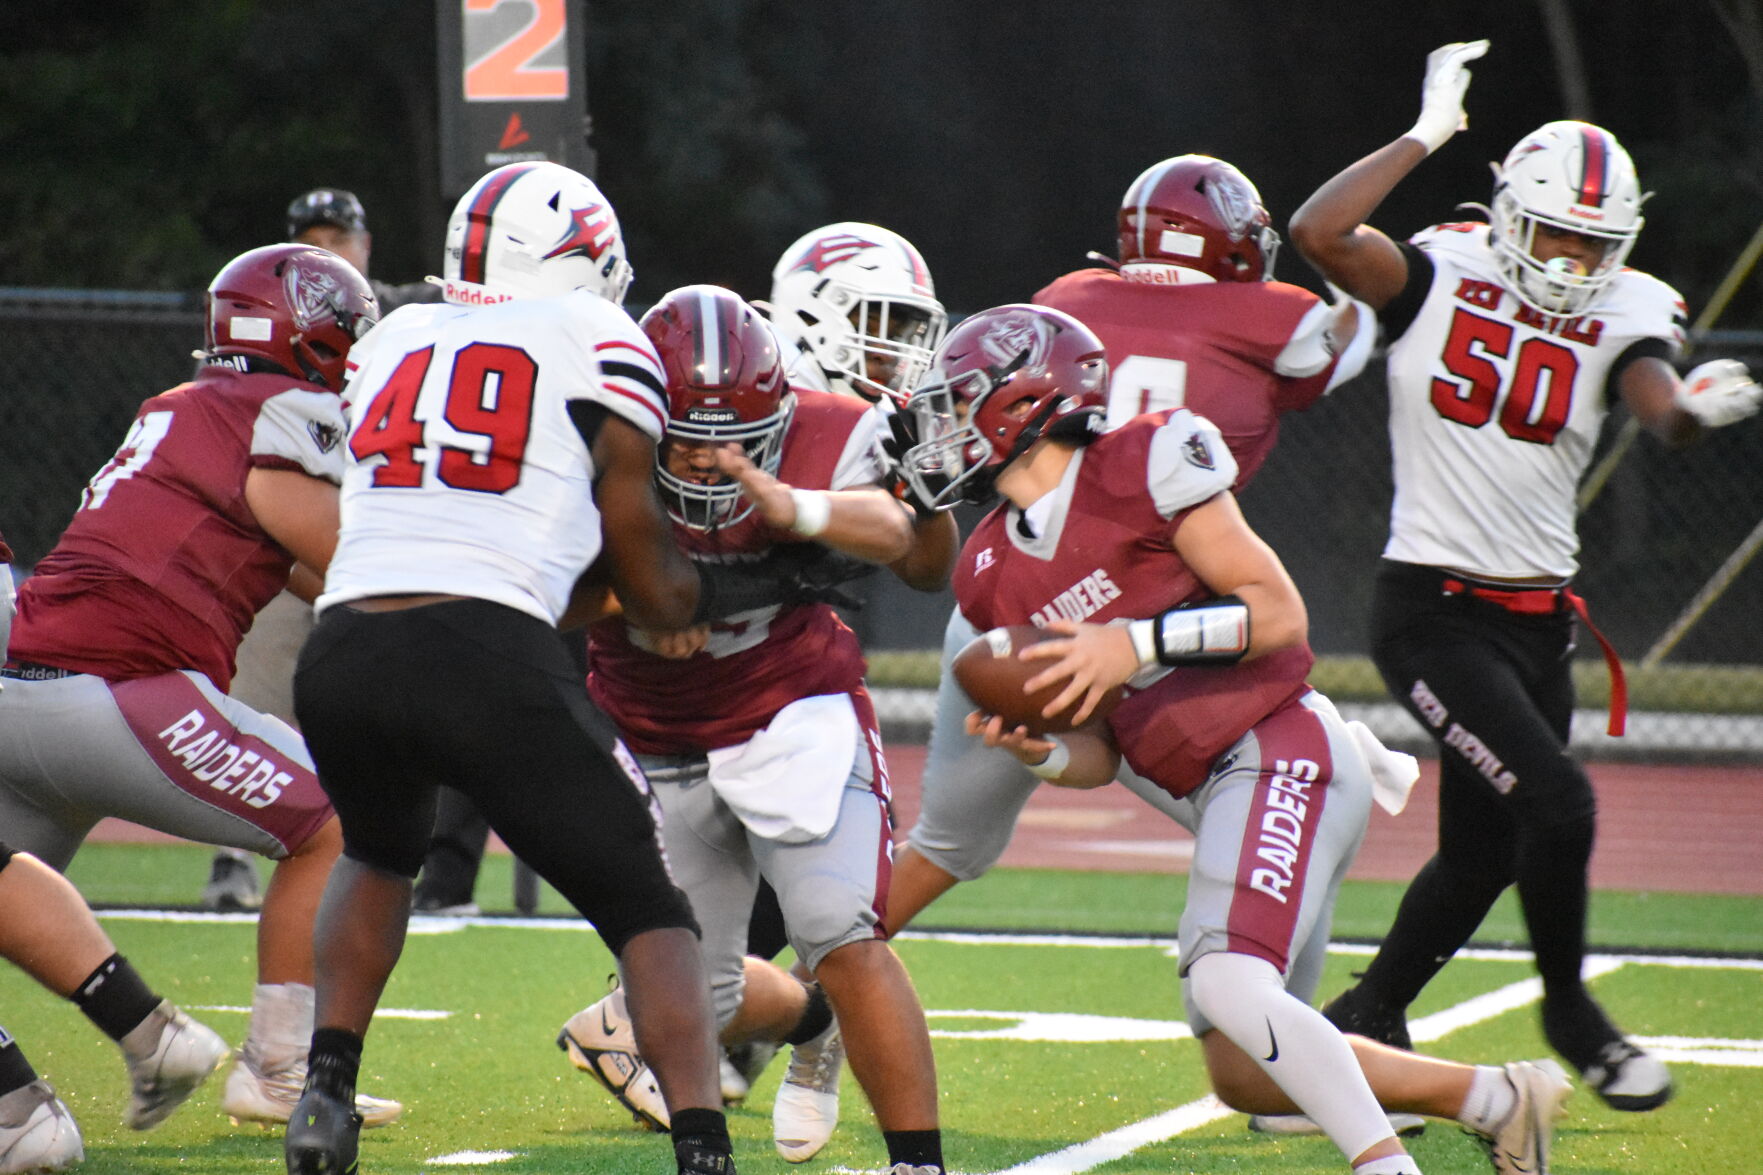 Southeast Whitfield suffers heartbreaking loss to Druid Hills in overtime